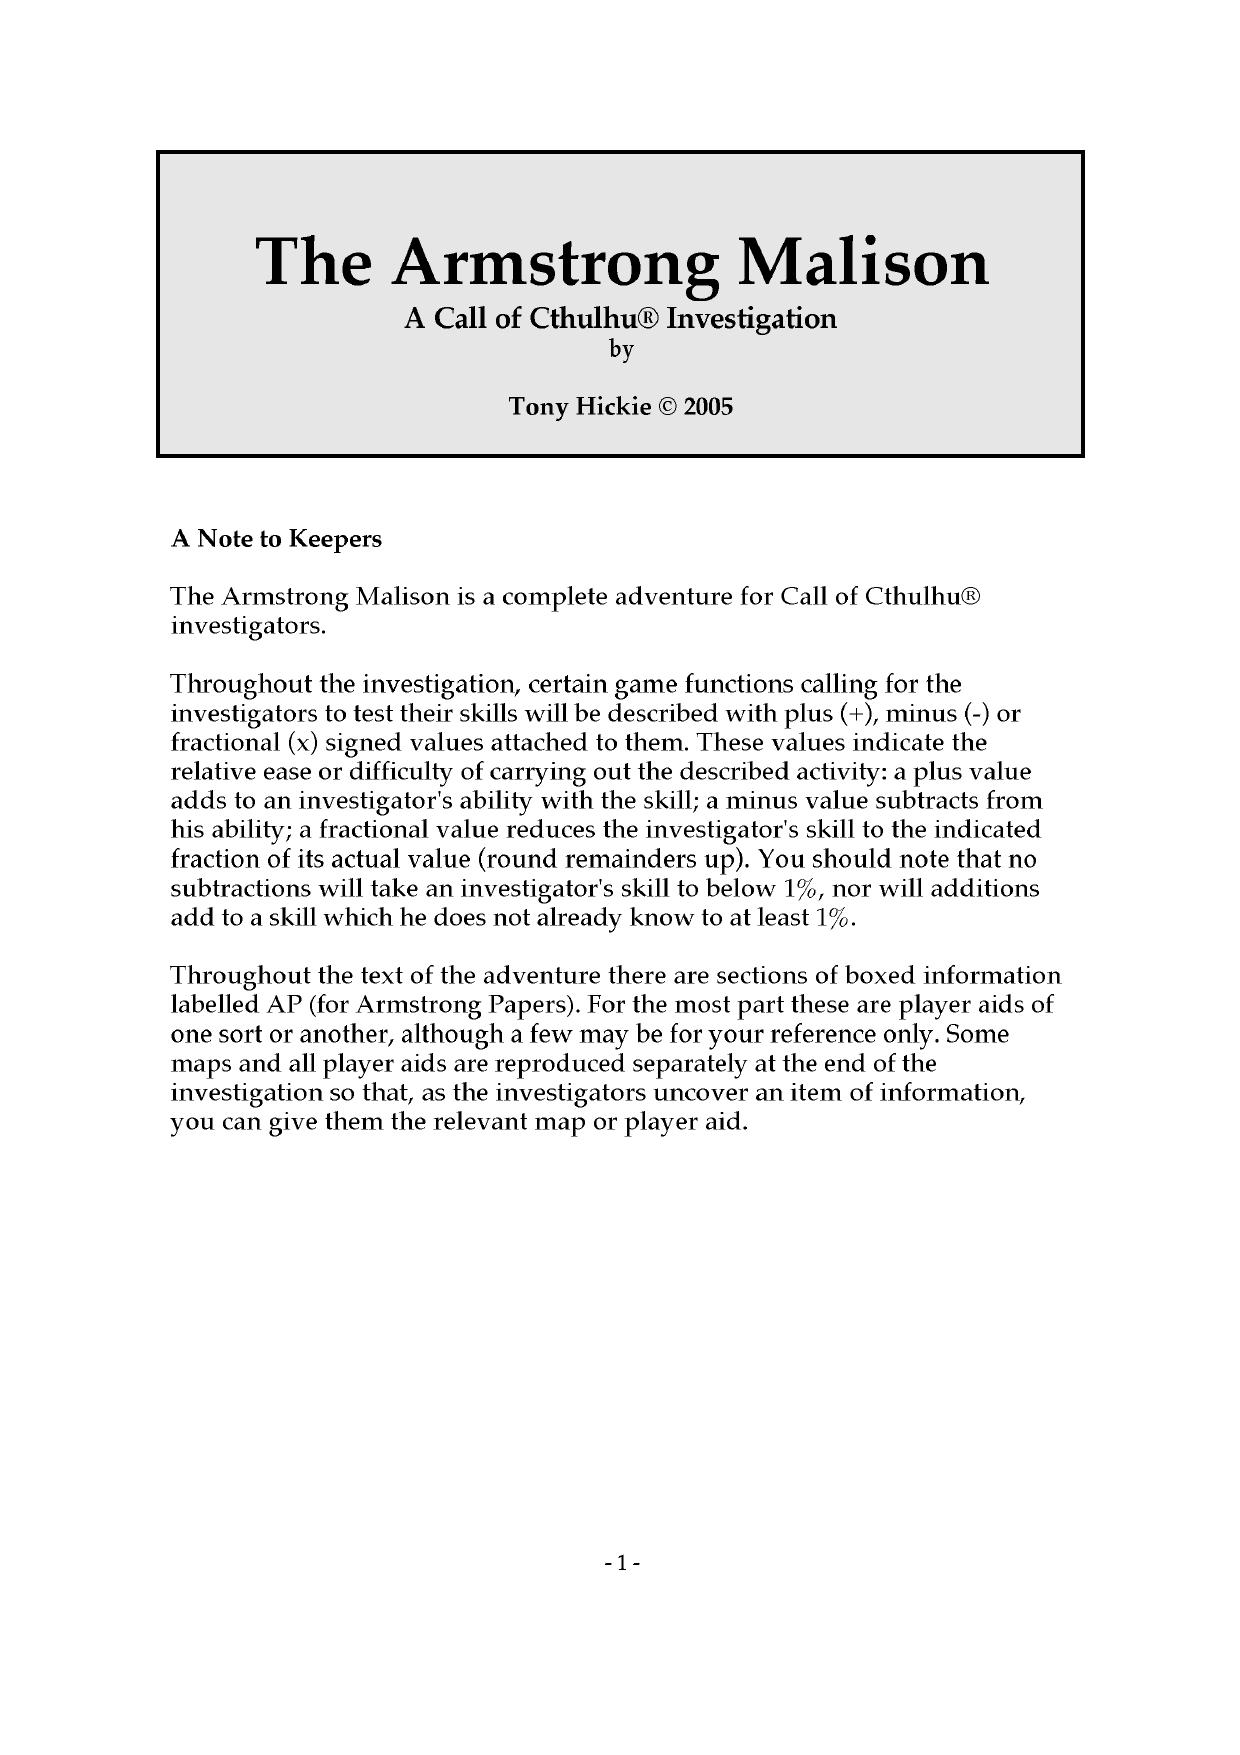 The Armstrong Malison.pdf